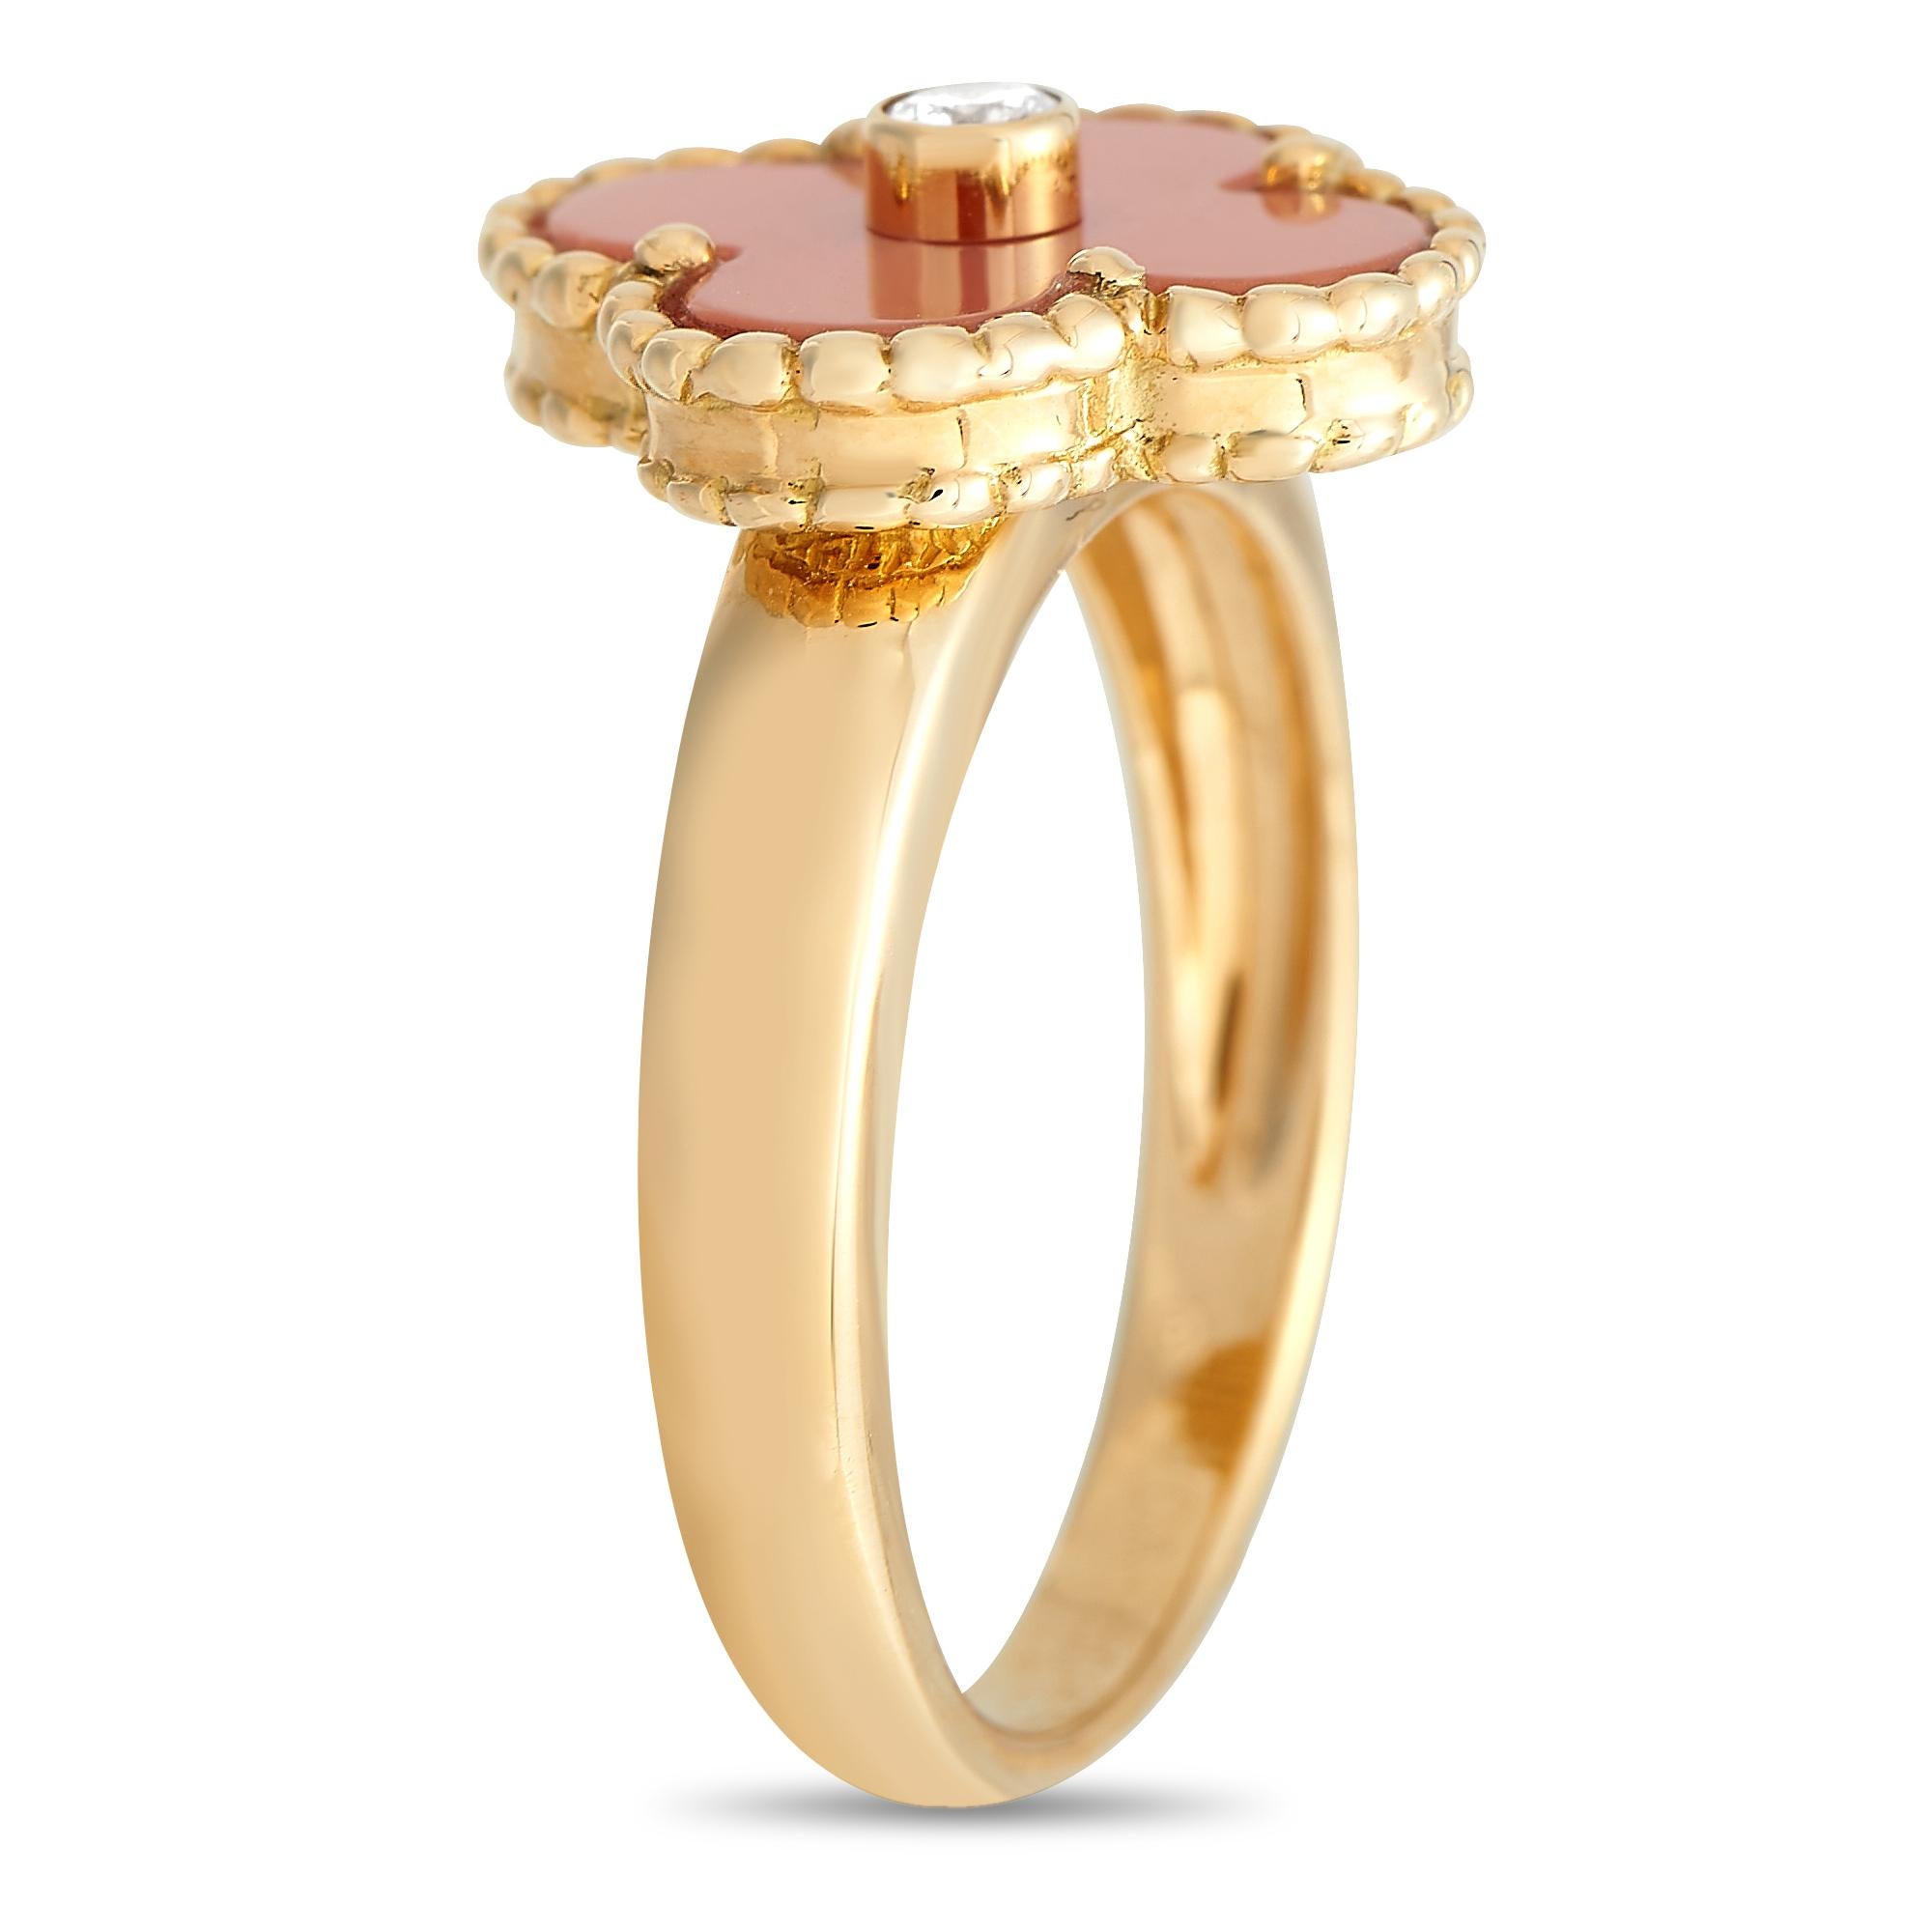 When you think your outfits could use a subtle hint of color, this is the perfect accessory to wear. The Van Cleef & Arpels diamond and coral Alhambra ring offers just the right amount of tint to liven up a minimalist chic outfit. It features a